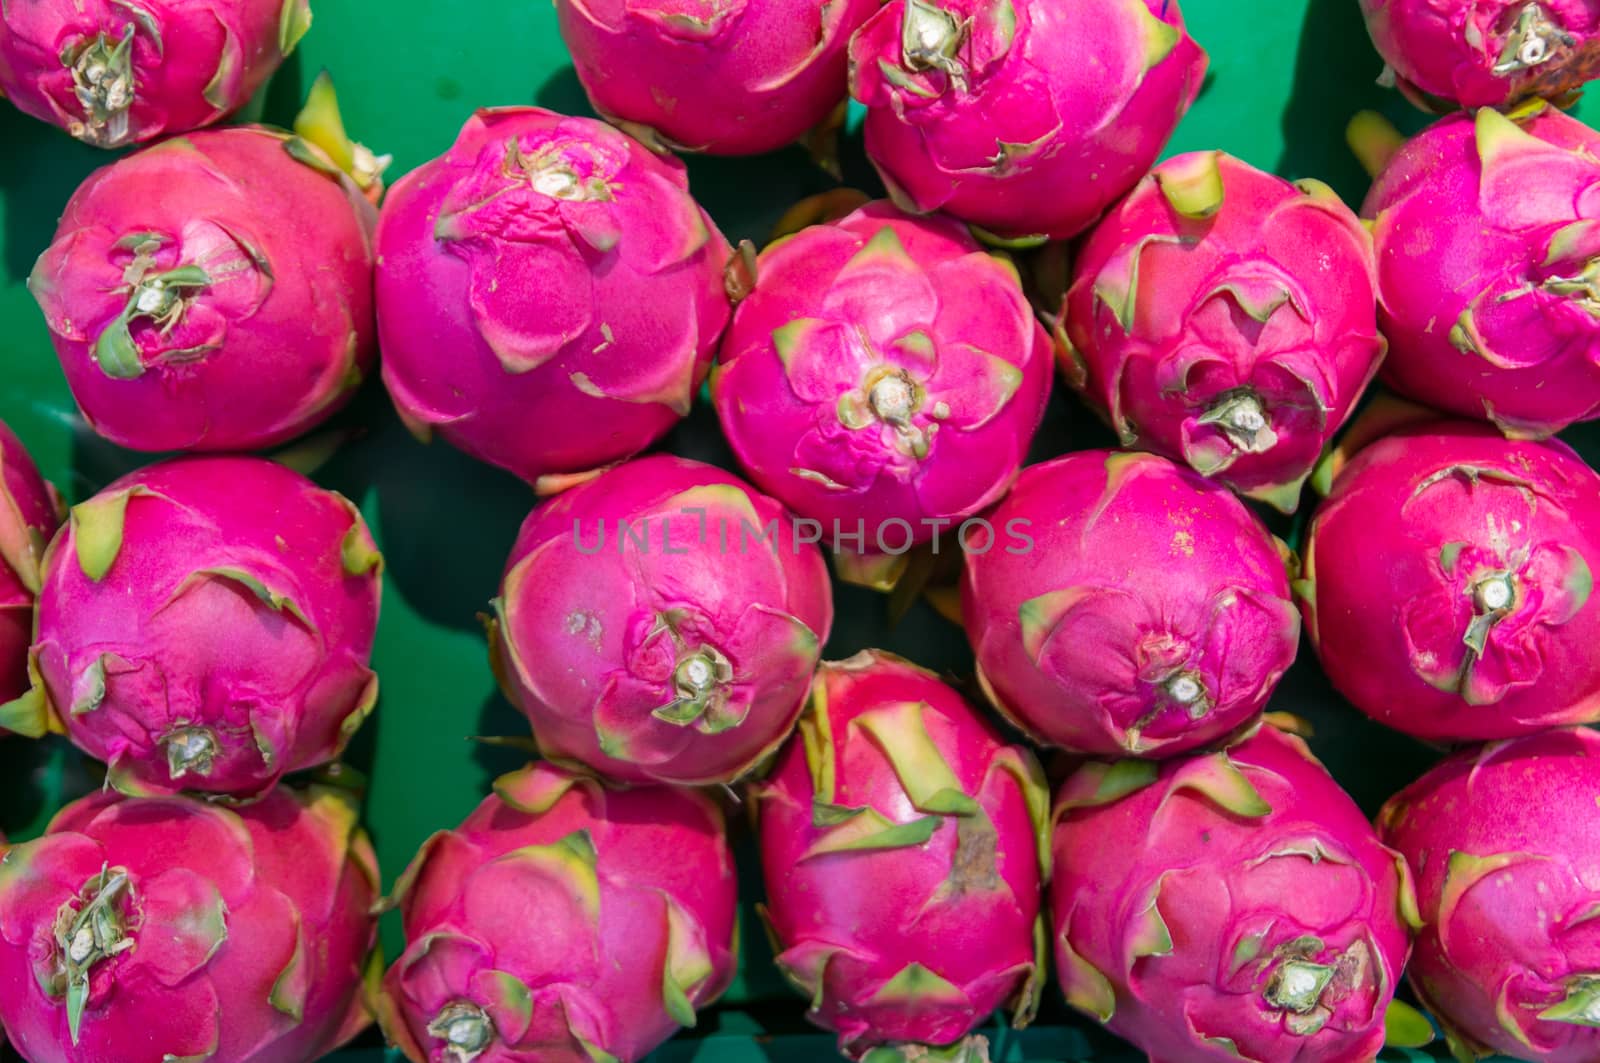 Dragon fruit on market stand, Thailand. by thampapon